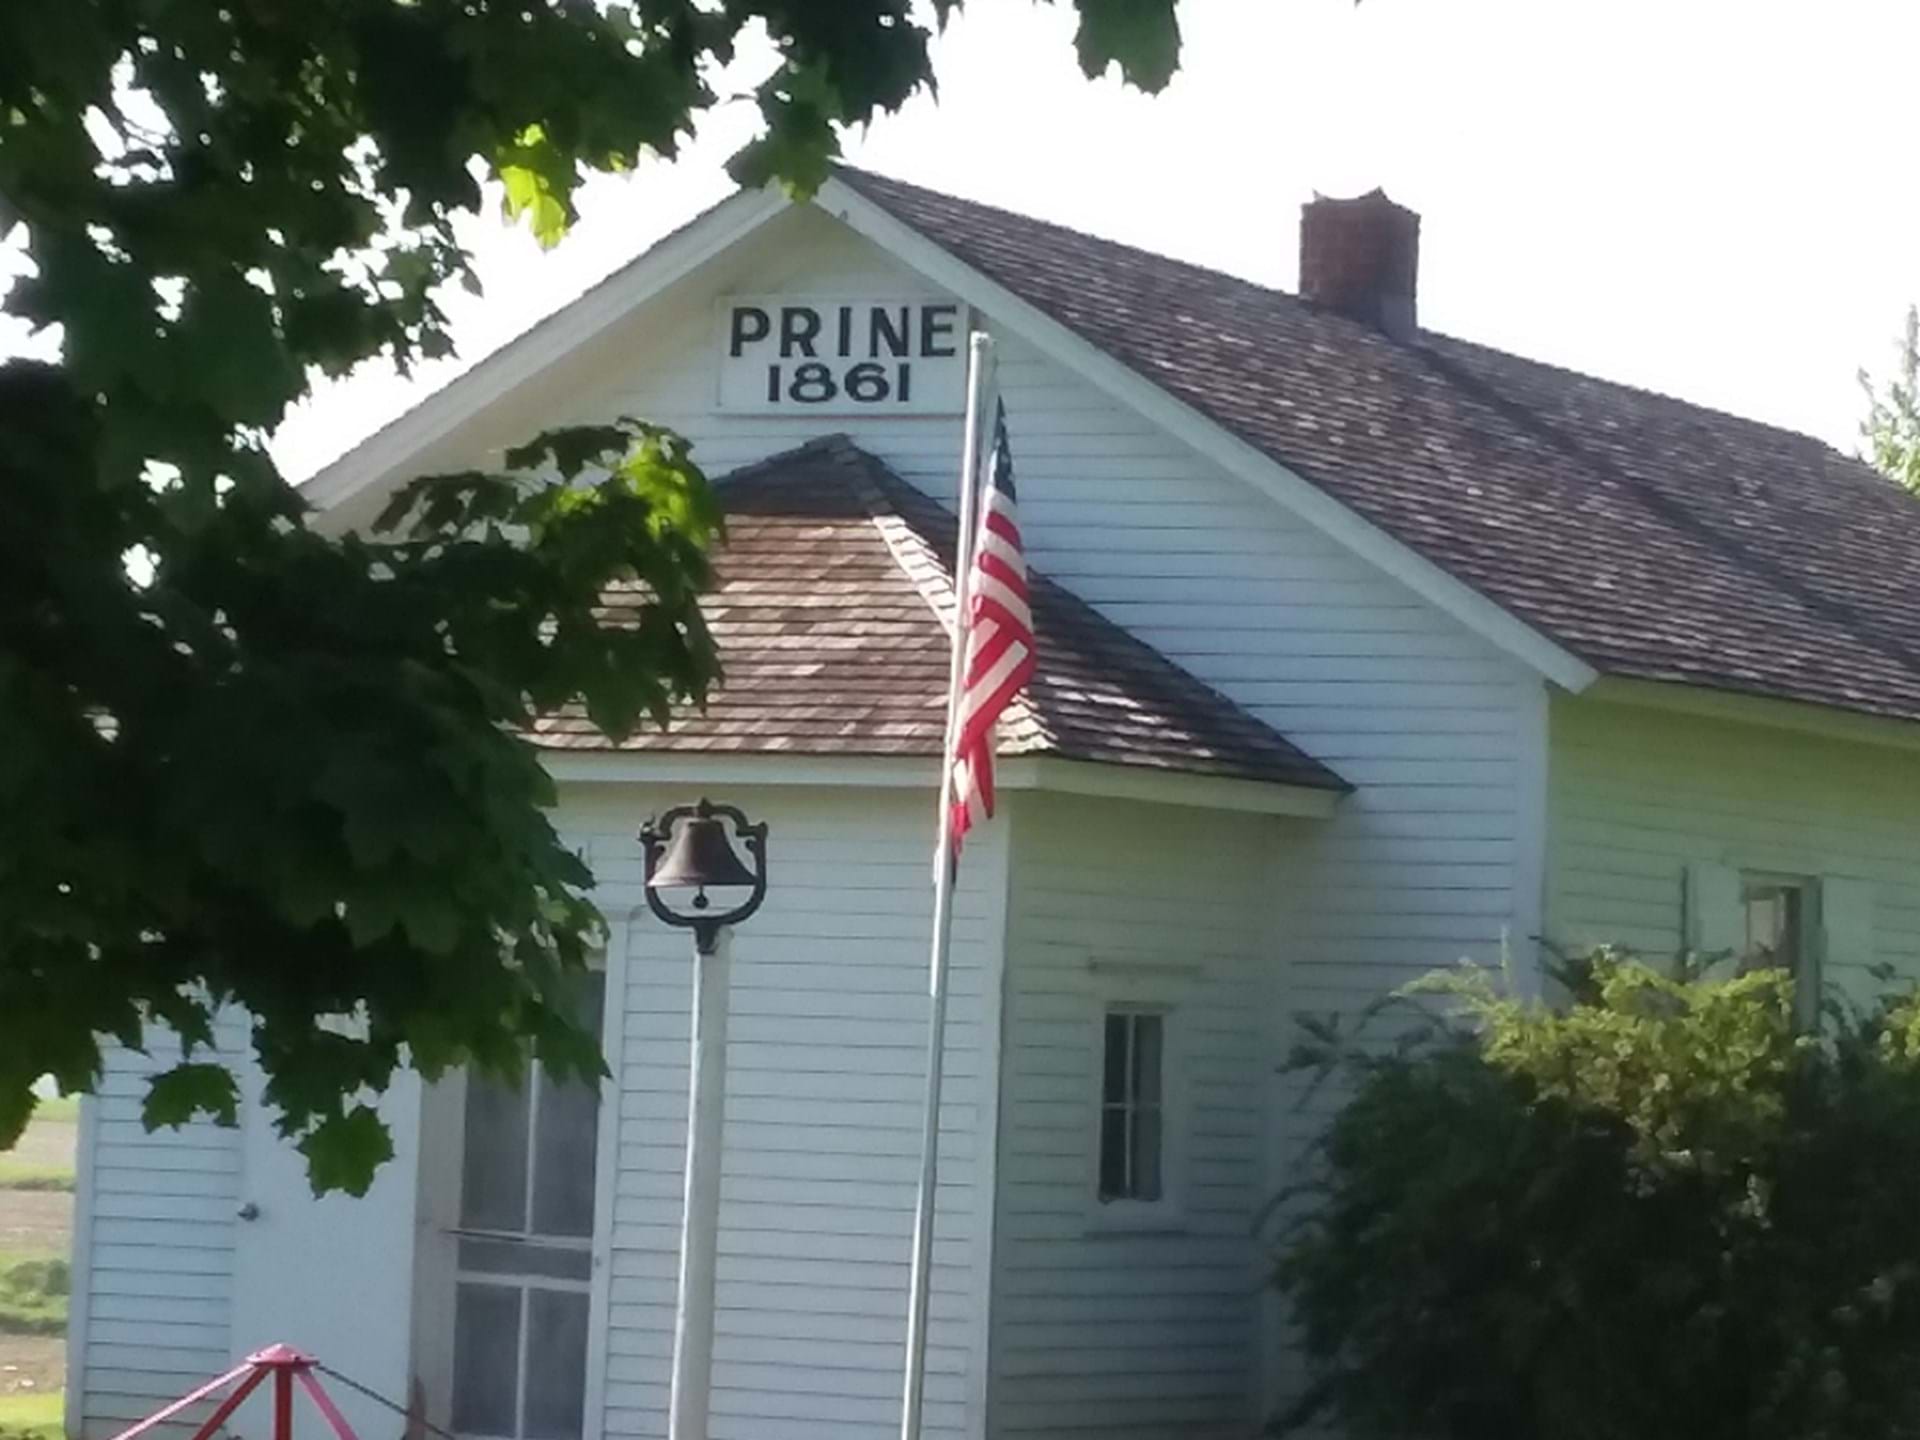 Prine School - Built in 1861 and used as a country school until 1966. 